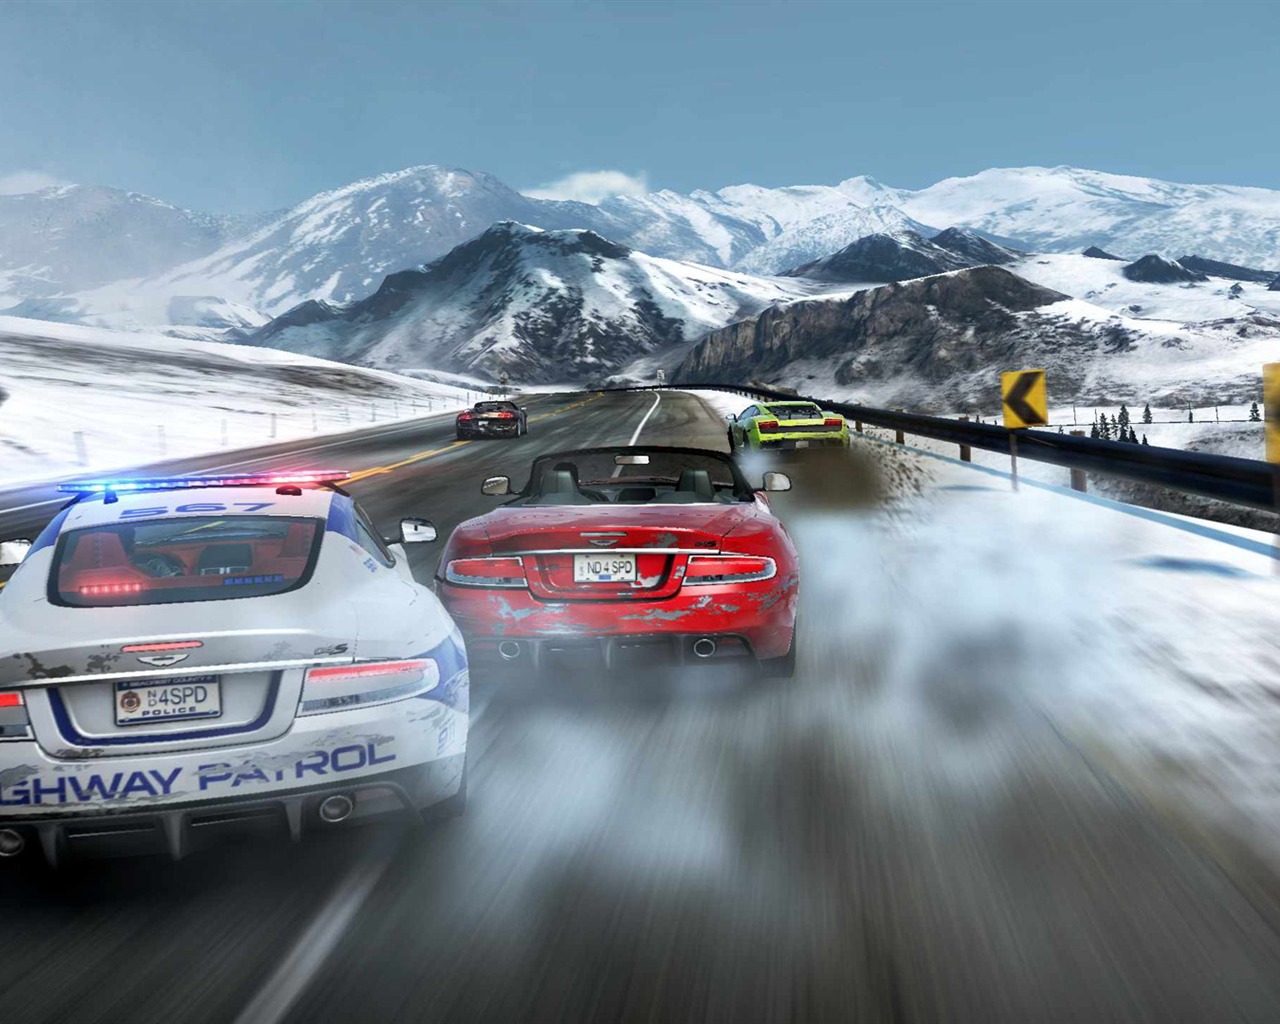 Need for Speed: Hot Pursuit 极品飞车14：热力追踪5 - 1280x1024